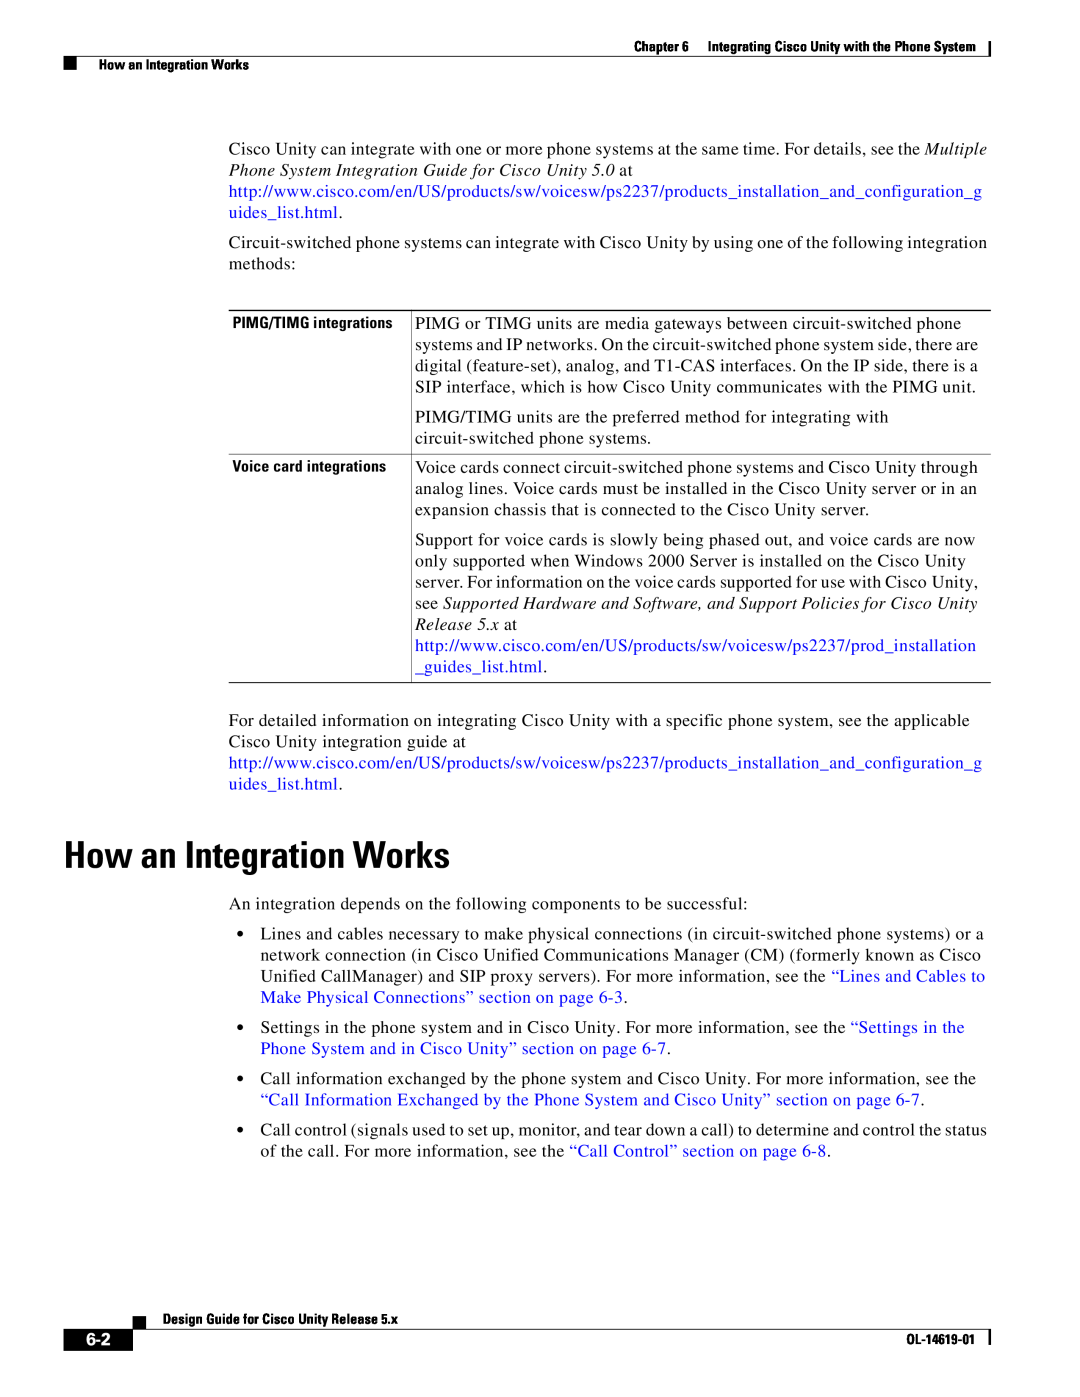 Cisco Systems OL-14619-01 manual How an Integration Works, guideslist.html 